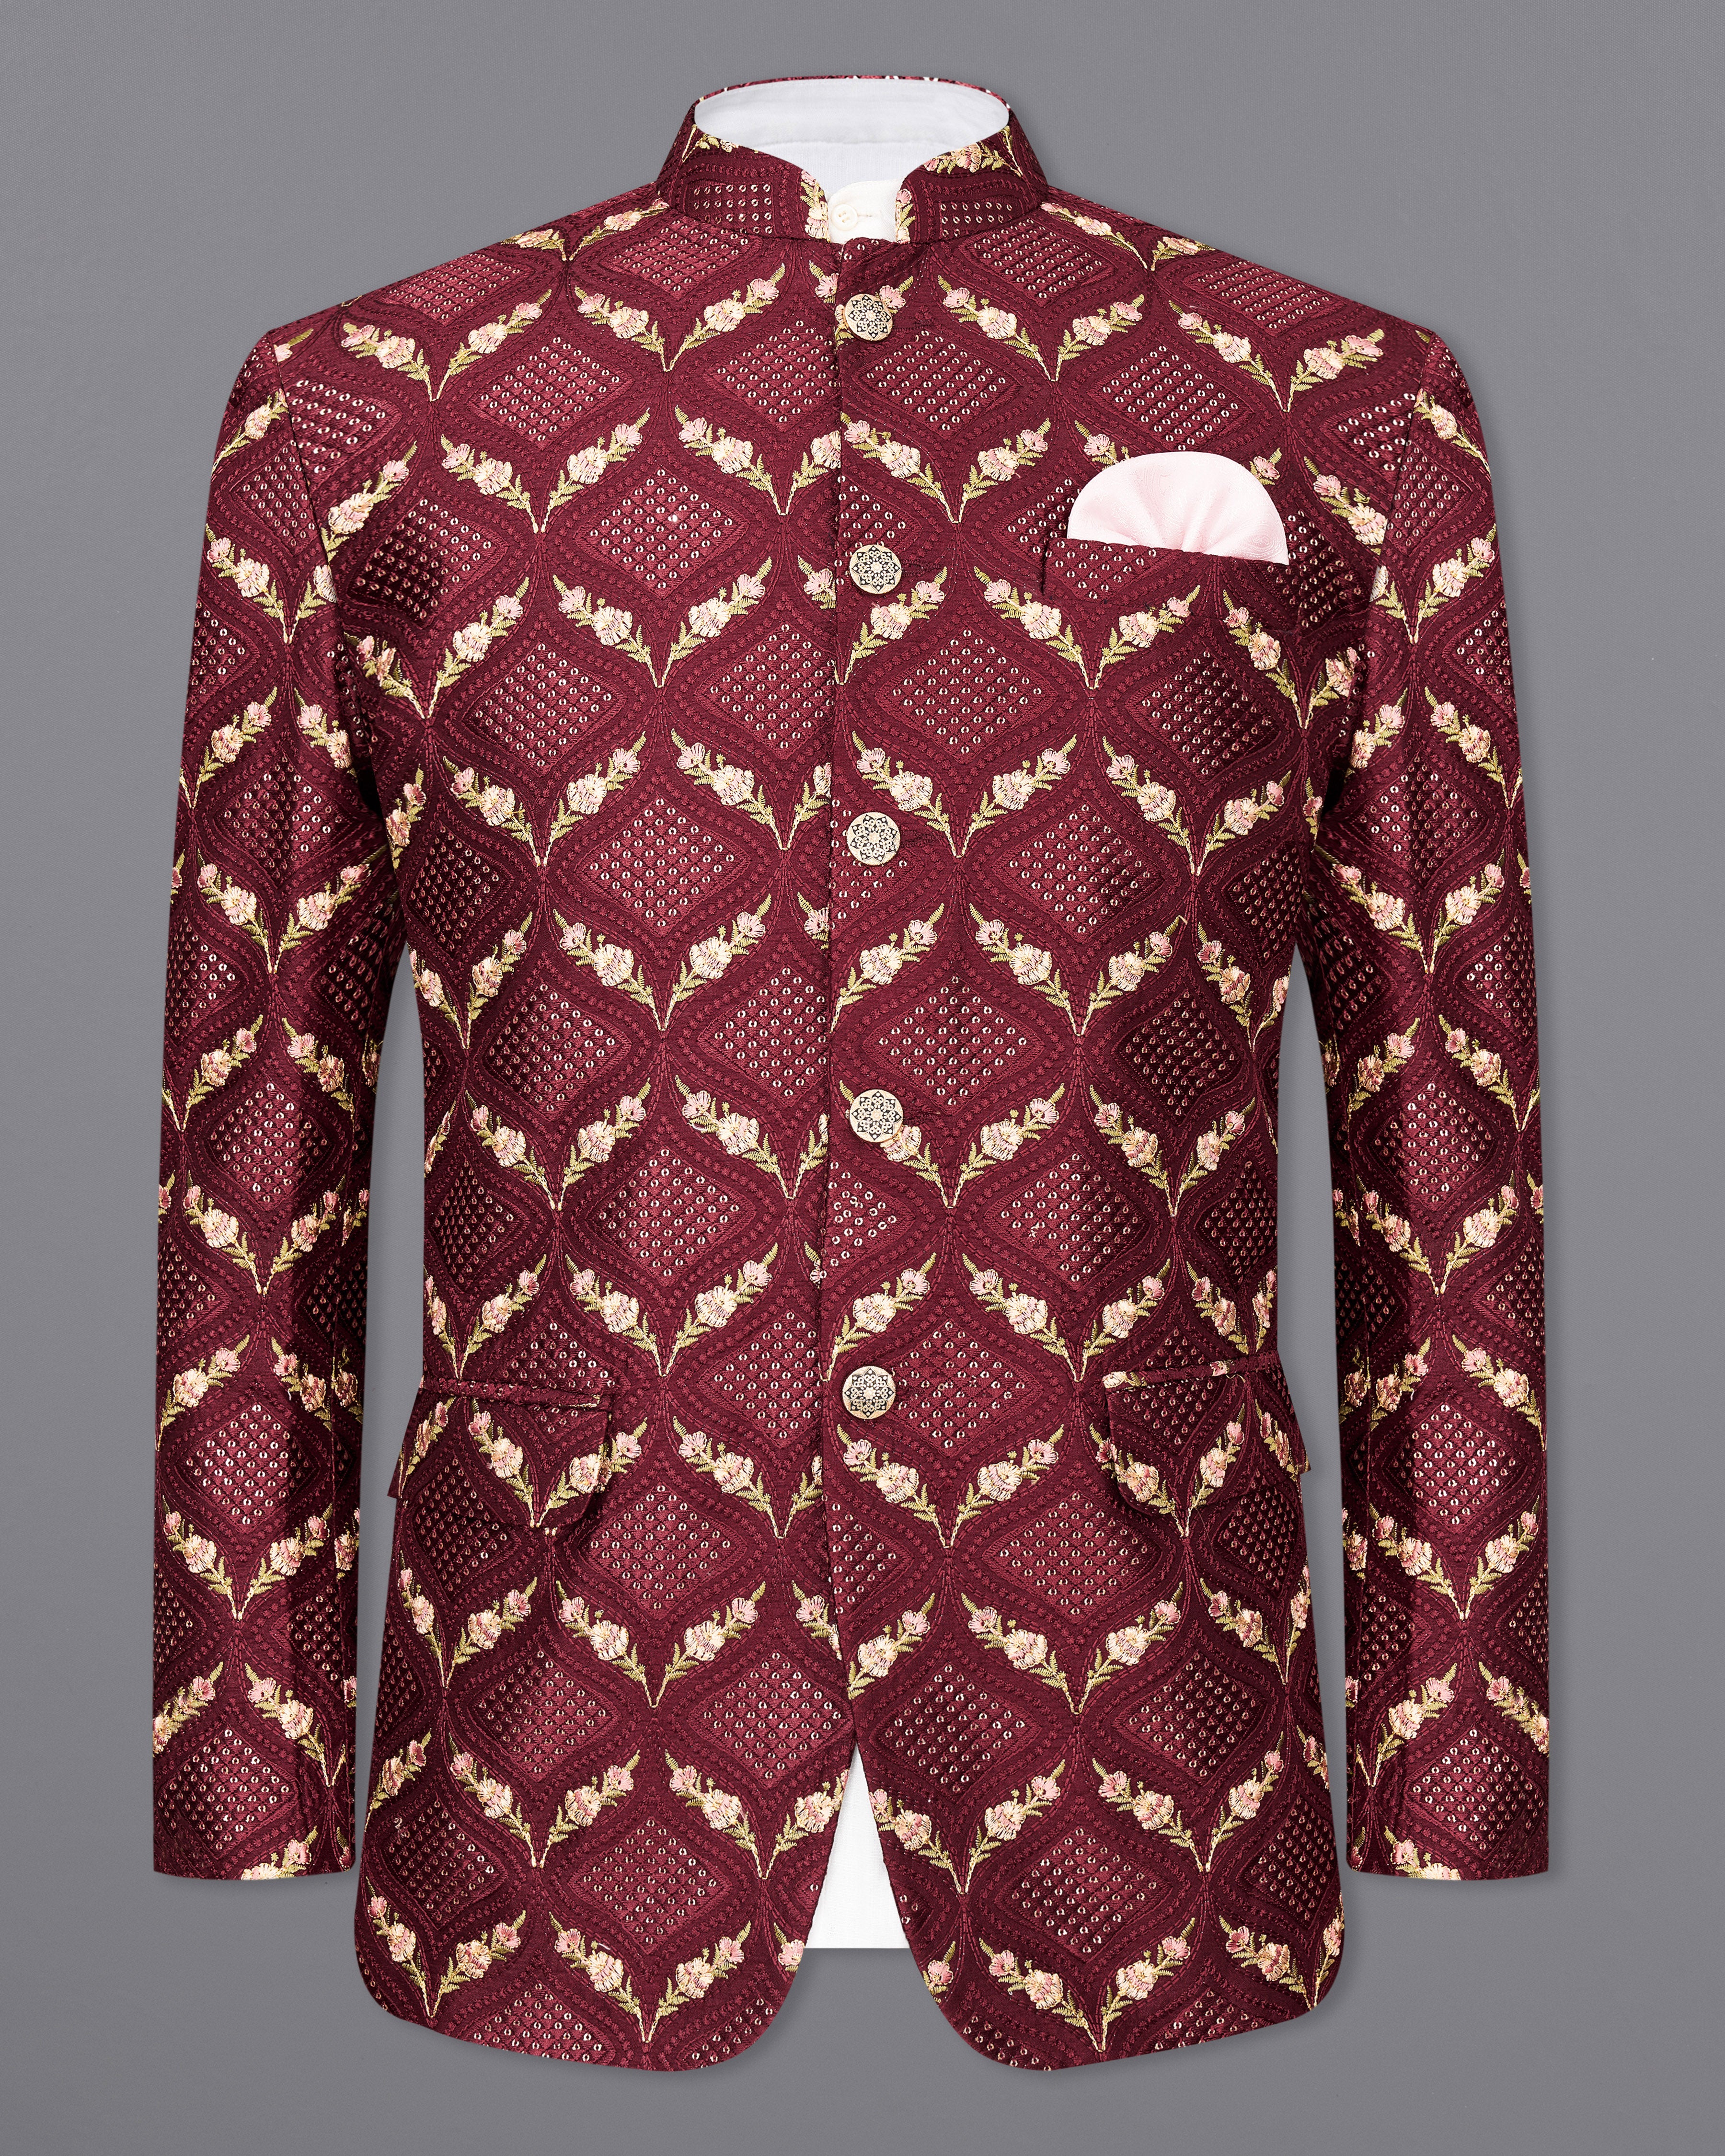 Wine with Lichen Green and Flamingo Pink Embroidered with Sequins Work Bandhgala Blazer BL2403-BG-36, BL2403-BG-38, BL2403-BG-40, BL2403-BG-42, BL2403-BG-44, BL2403-BG-46, BL2403-BG-48, BL2403-BG-50, BL2403-BG-52, BL2403-BG-54, BL2403-BG-56, BL2403-BG-58, BL2403-BG-60	